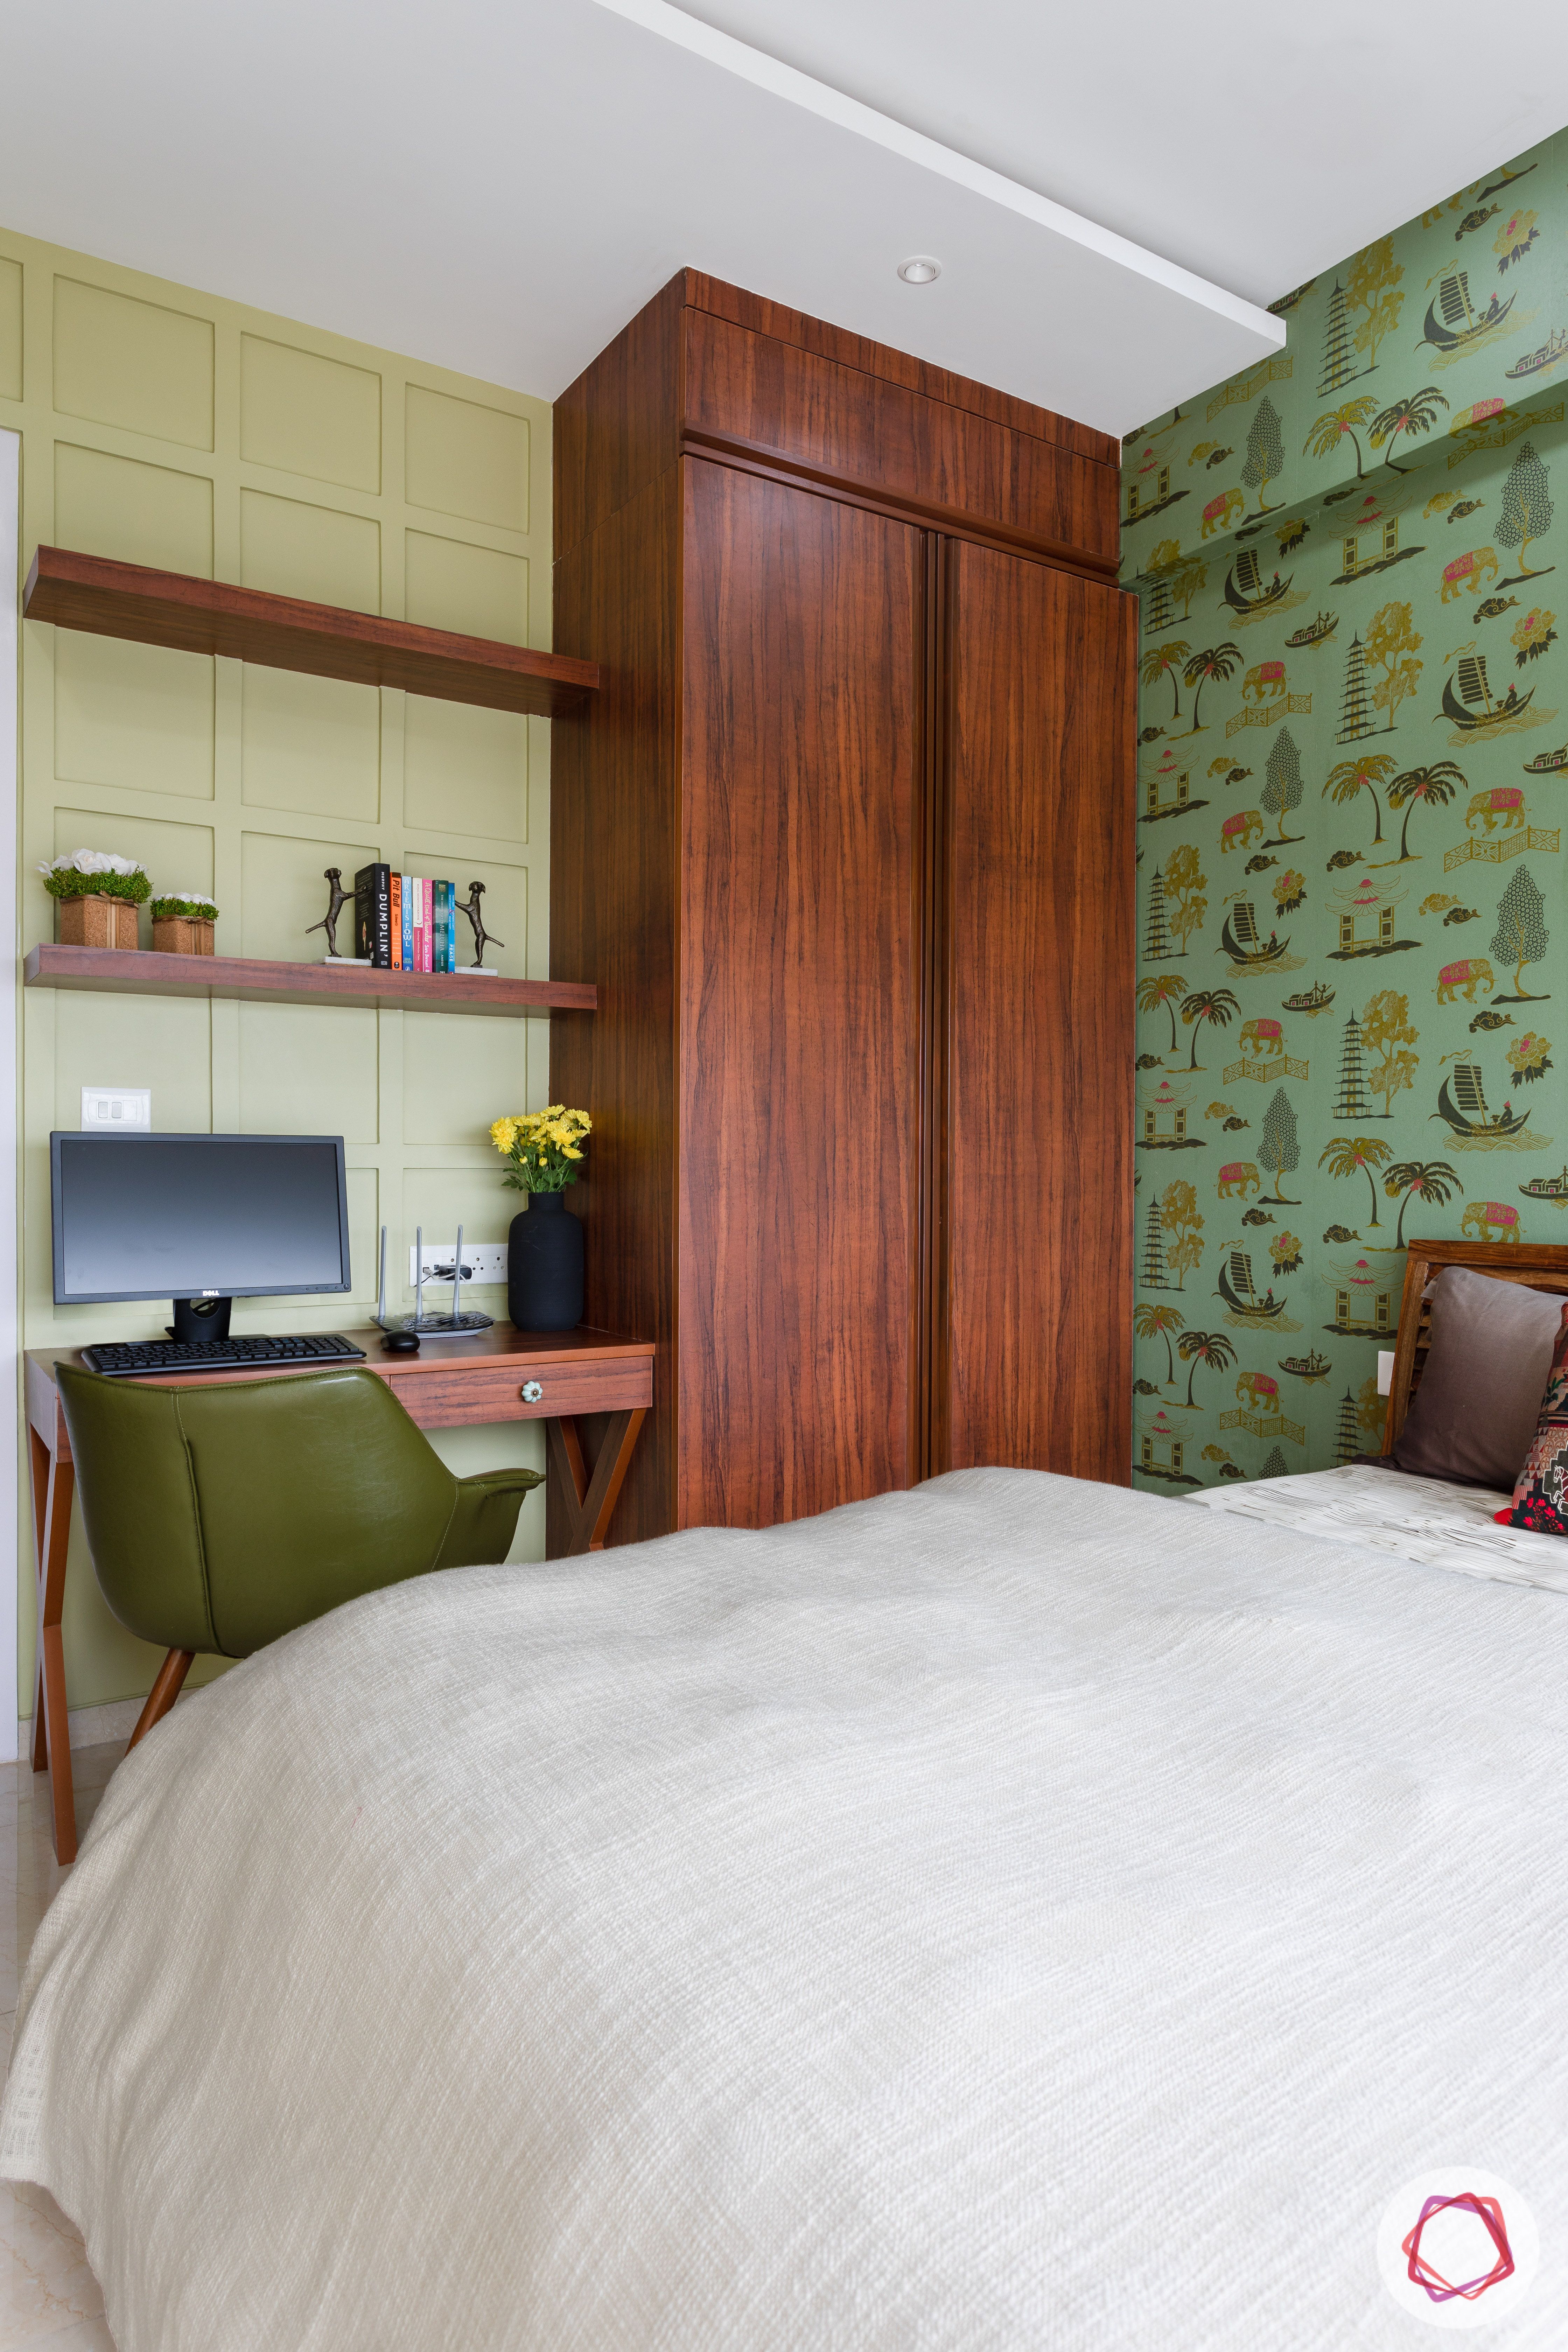 crescent bay-guest bedroom-green wallpaper-study table-wall mouldings-wooden shelves